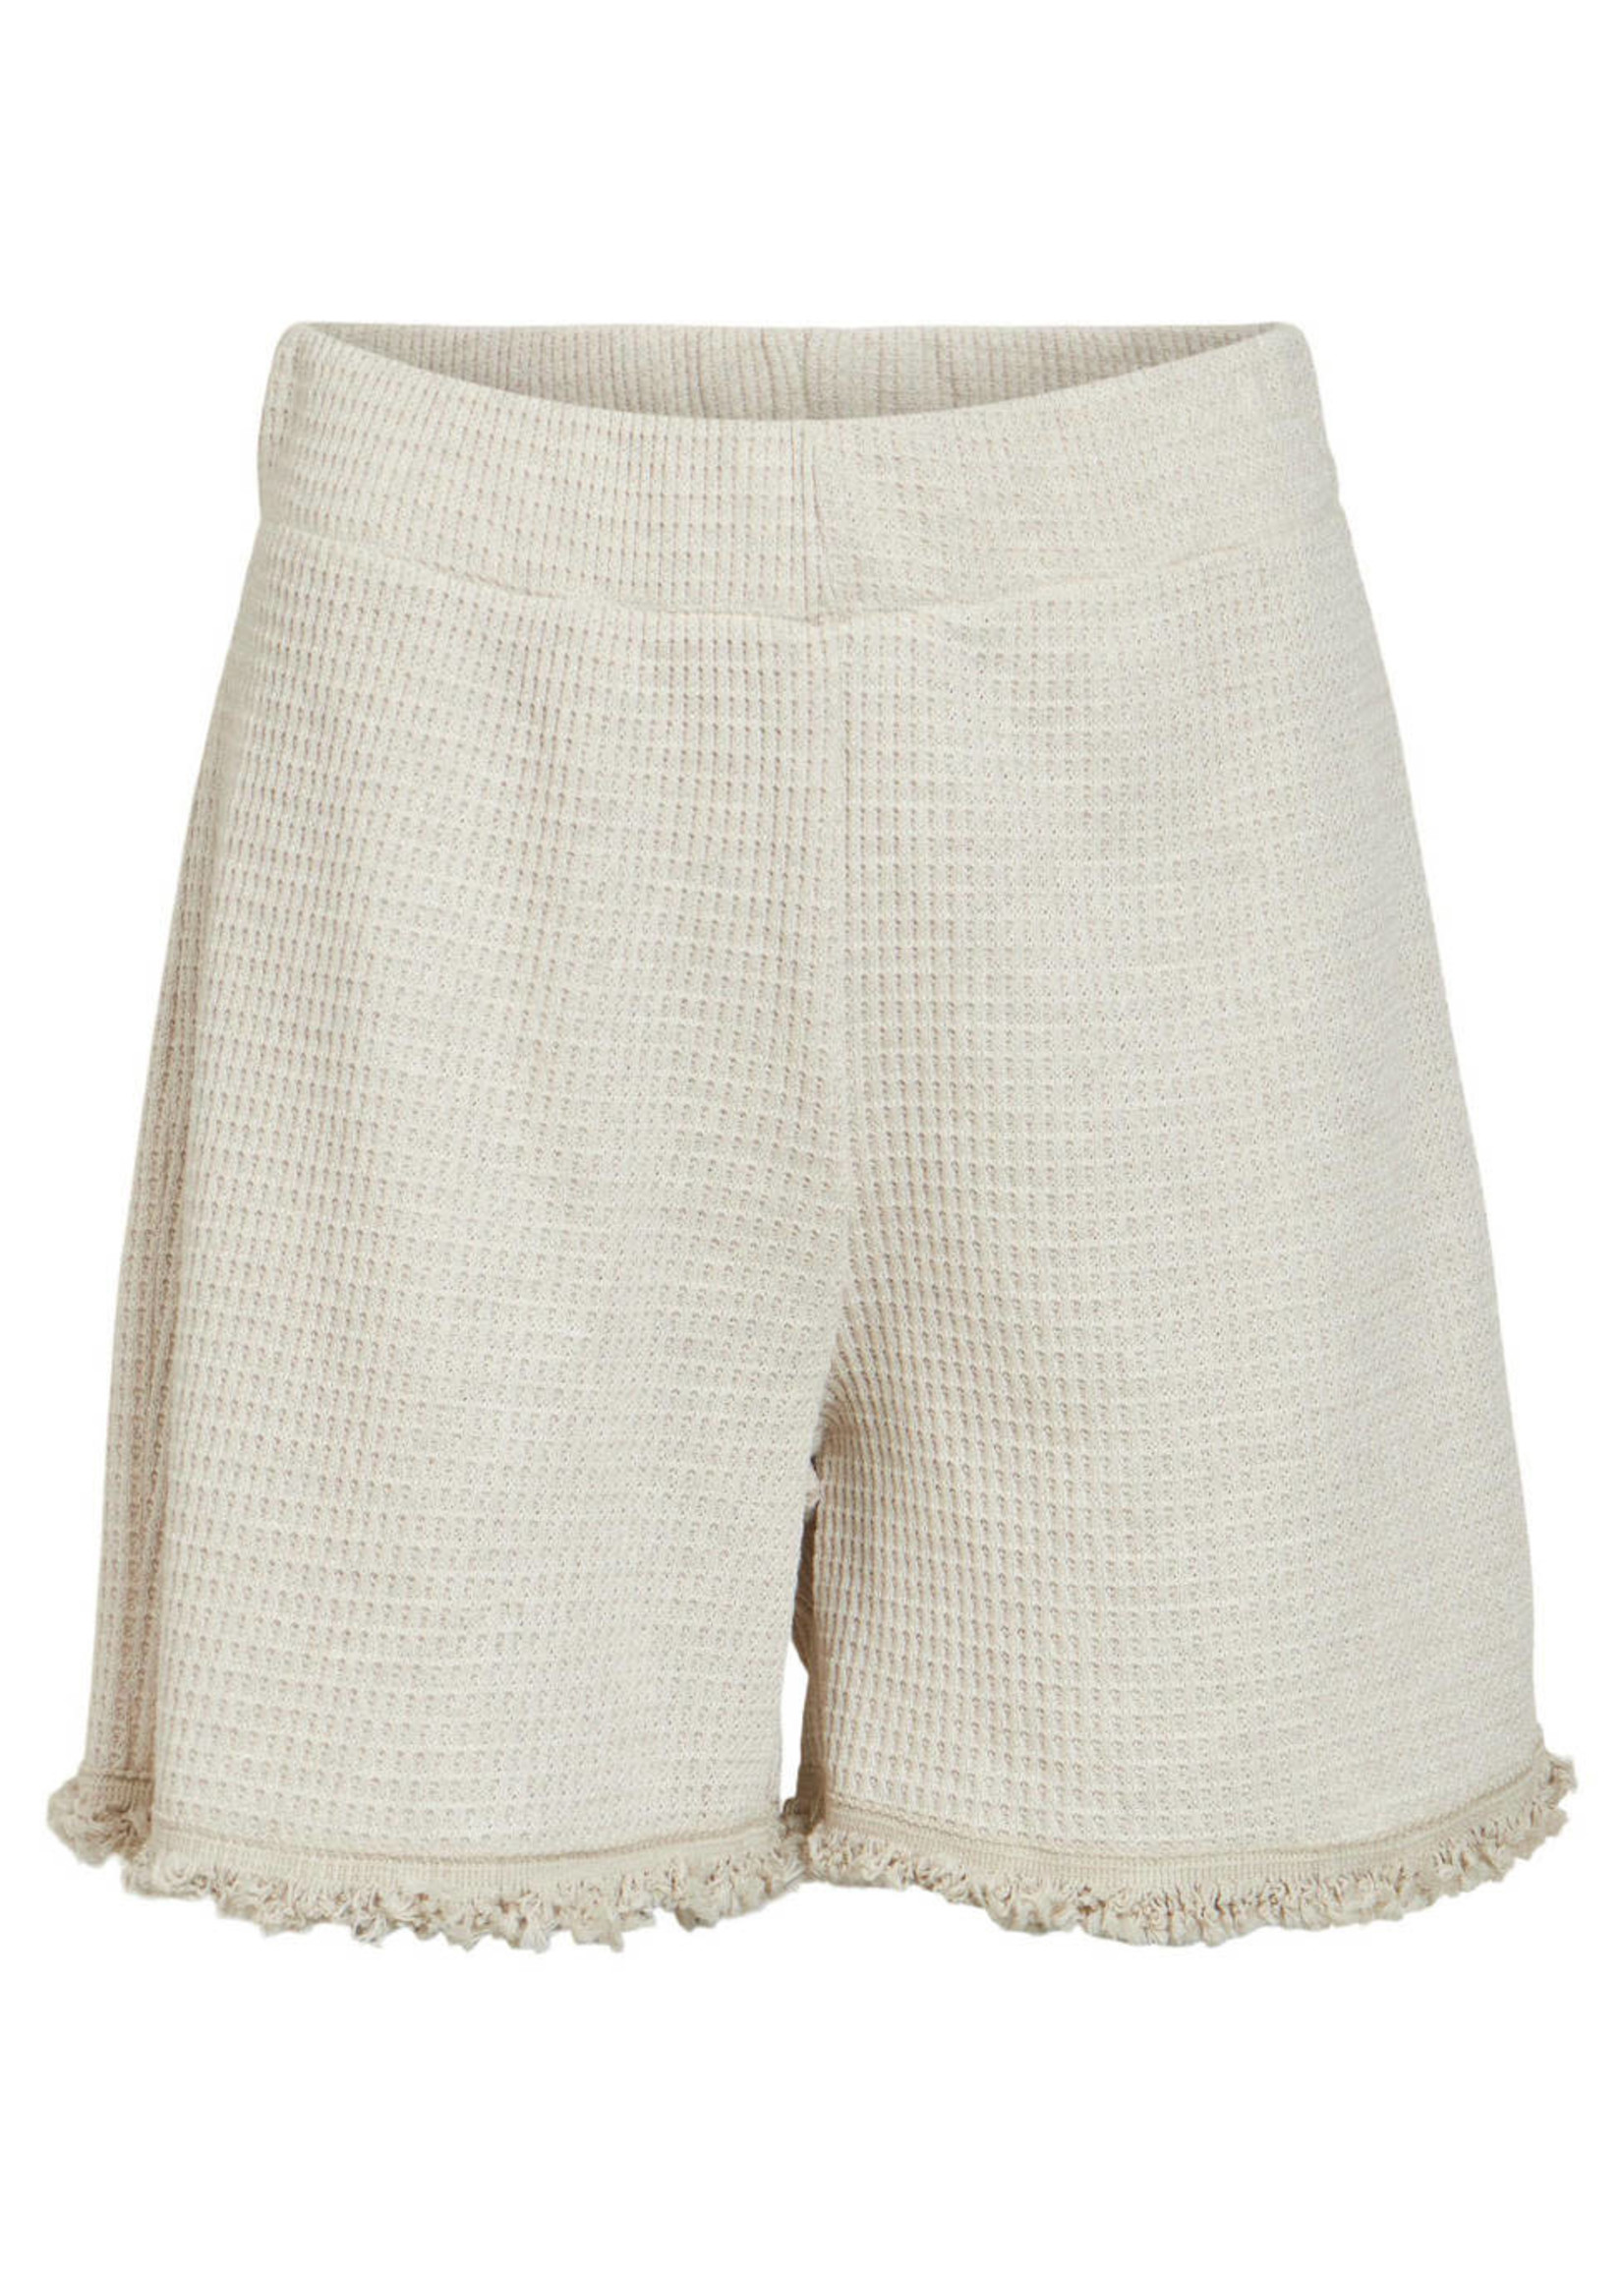 Object Object - Objkelly Shorts - Sandshell